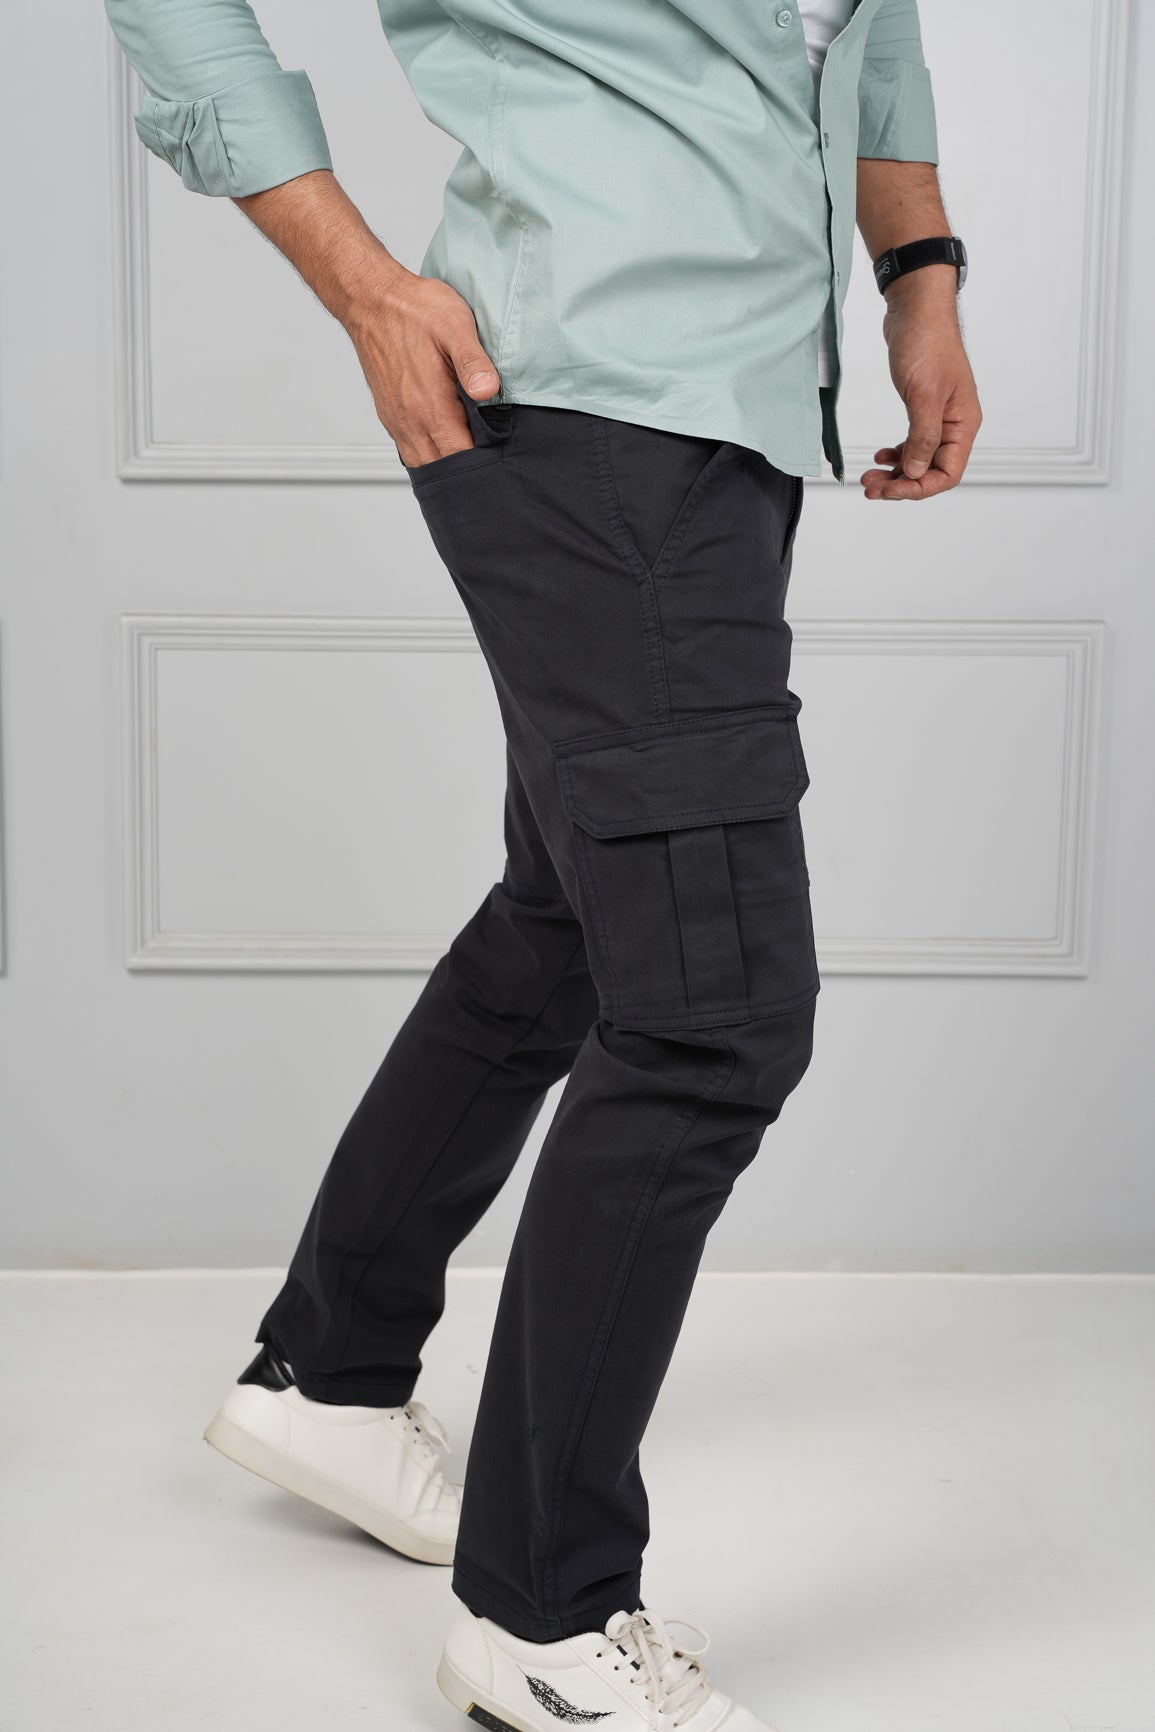 Buy Boys Cargo Trousers  Navy Online at Best Price  Mothercare India